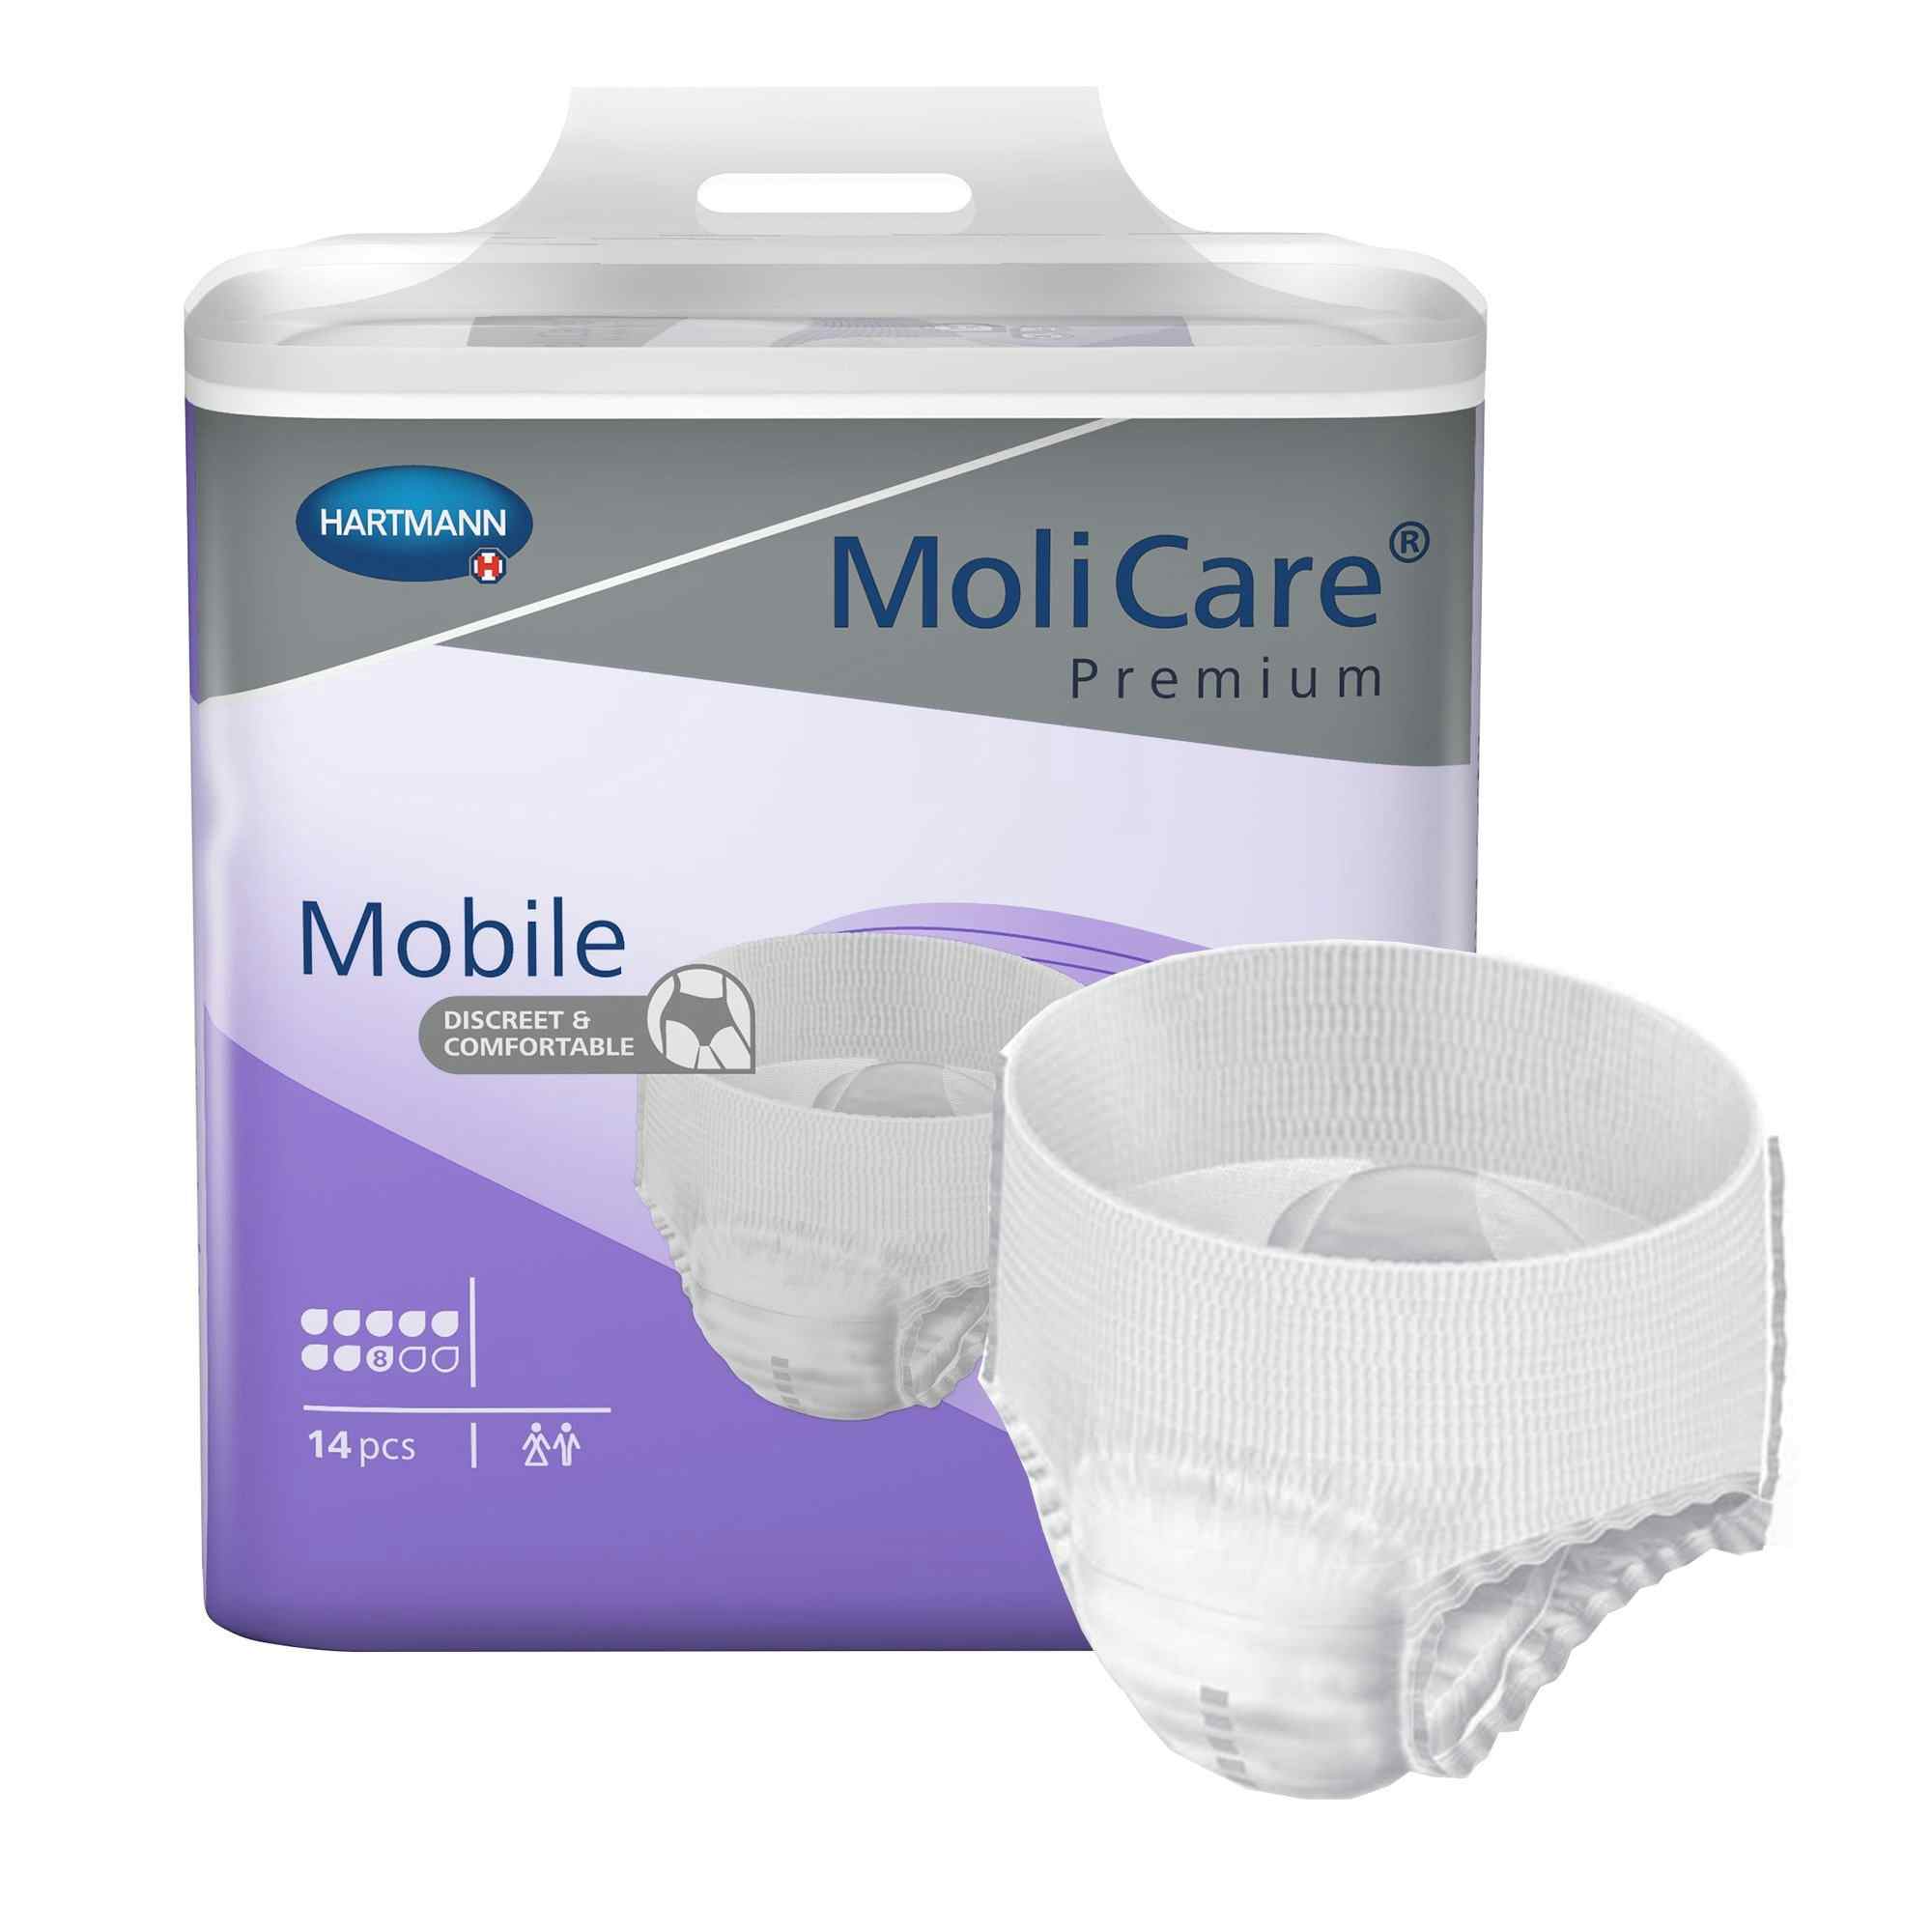 MoliCare Premium Mobile Pull-Up Underwear, 8 Drops Heavy Absorbency, 915874, X-Large (59-69") - Case of 56